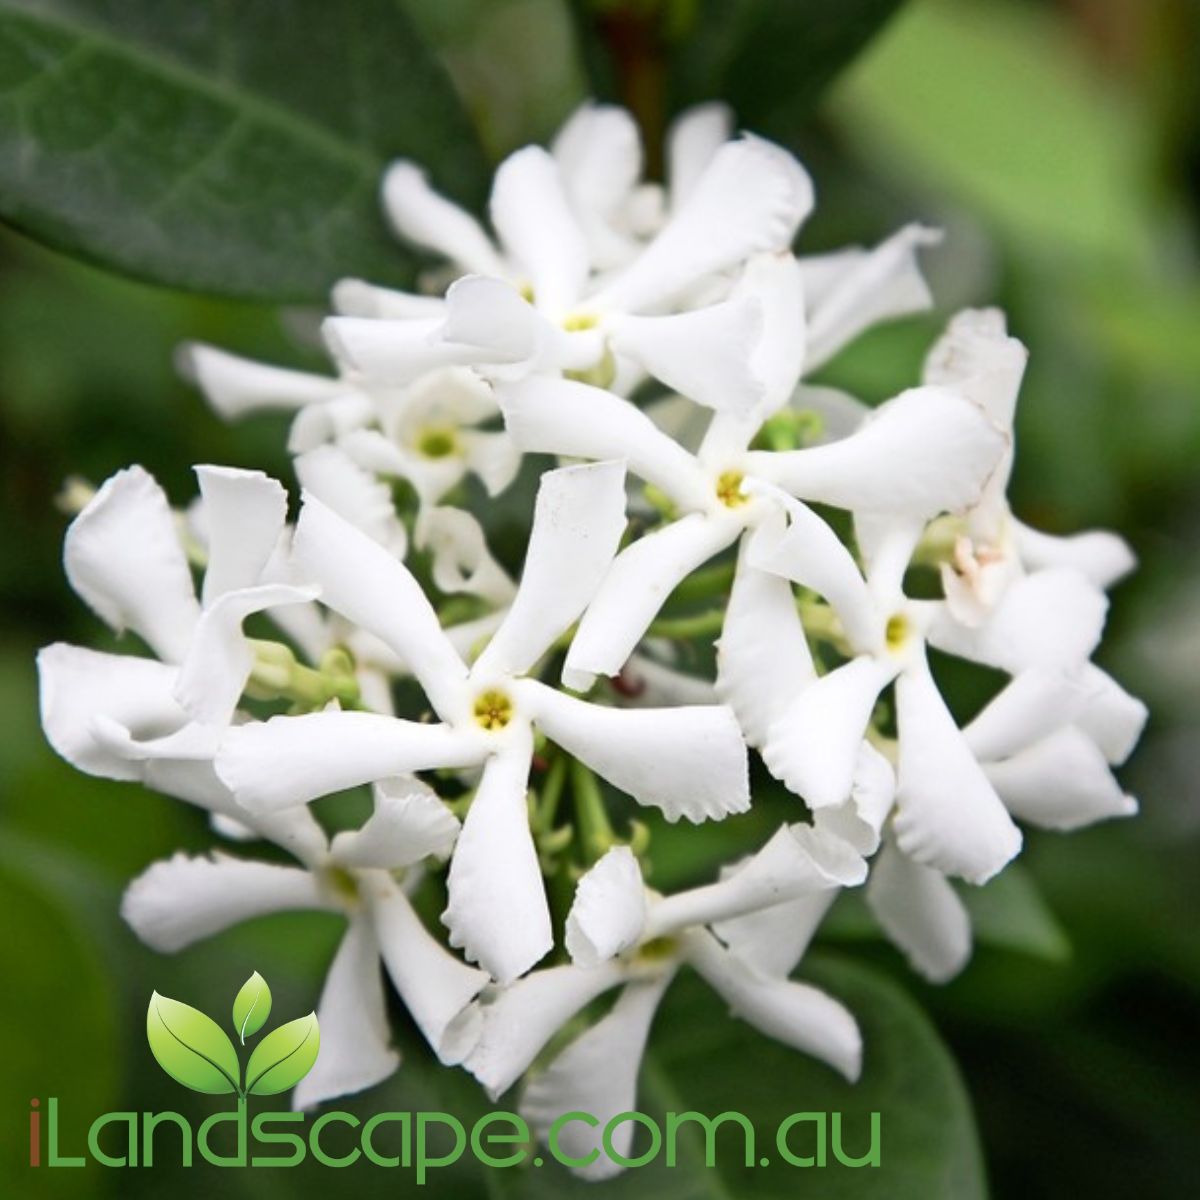 Trachleospermum jasmenoides - Star Jasmine is a very popular groundcover / vine. makes a great screen with its dark green oval shaped glossy leaves all year around.  prolifically flowers in with highly perfumed scents in Springs and sometimes in Summer depending on condition in Australia 